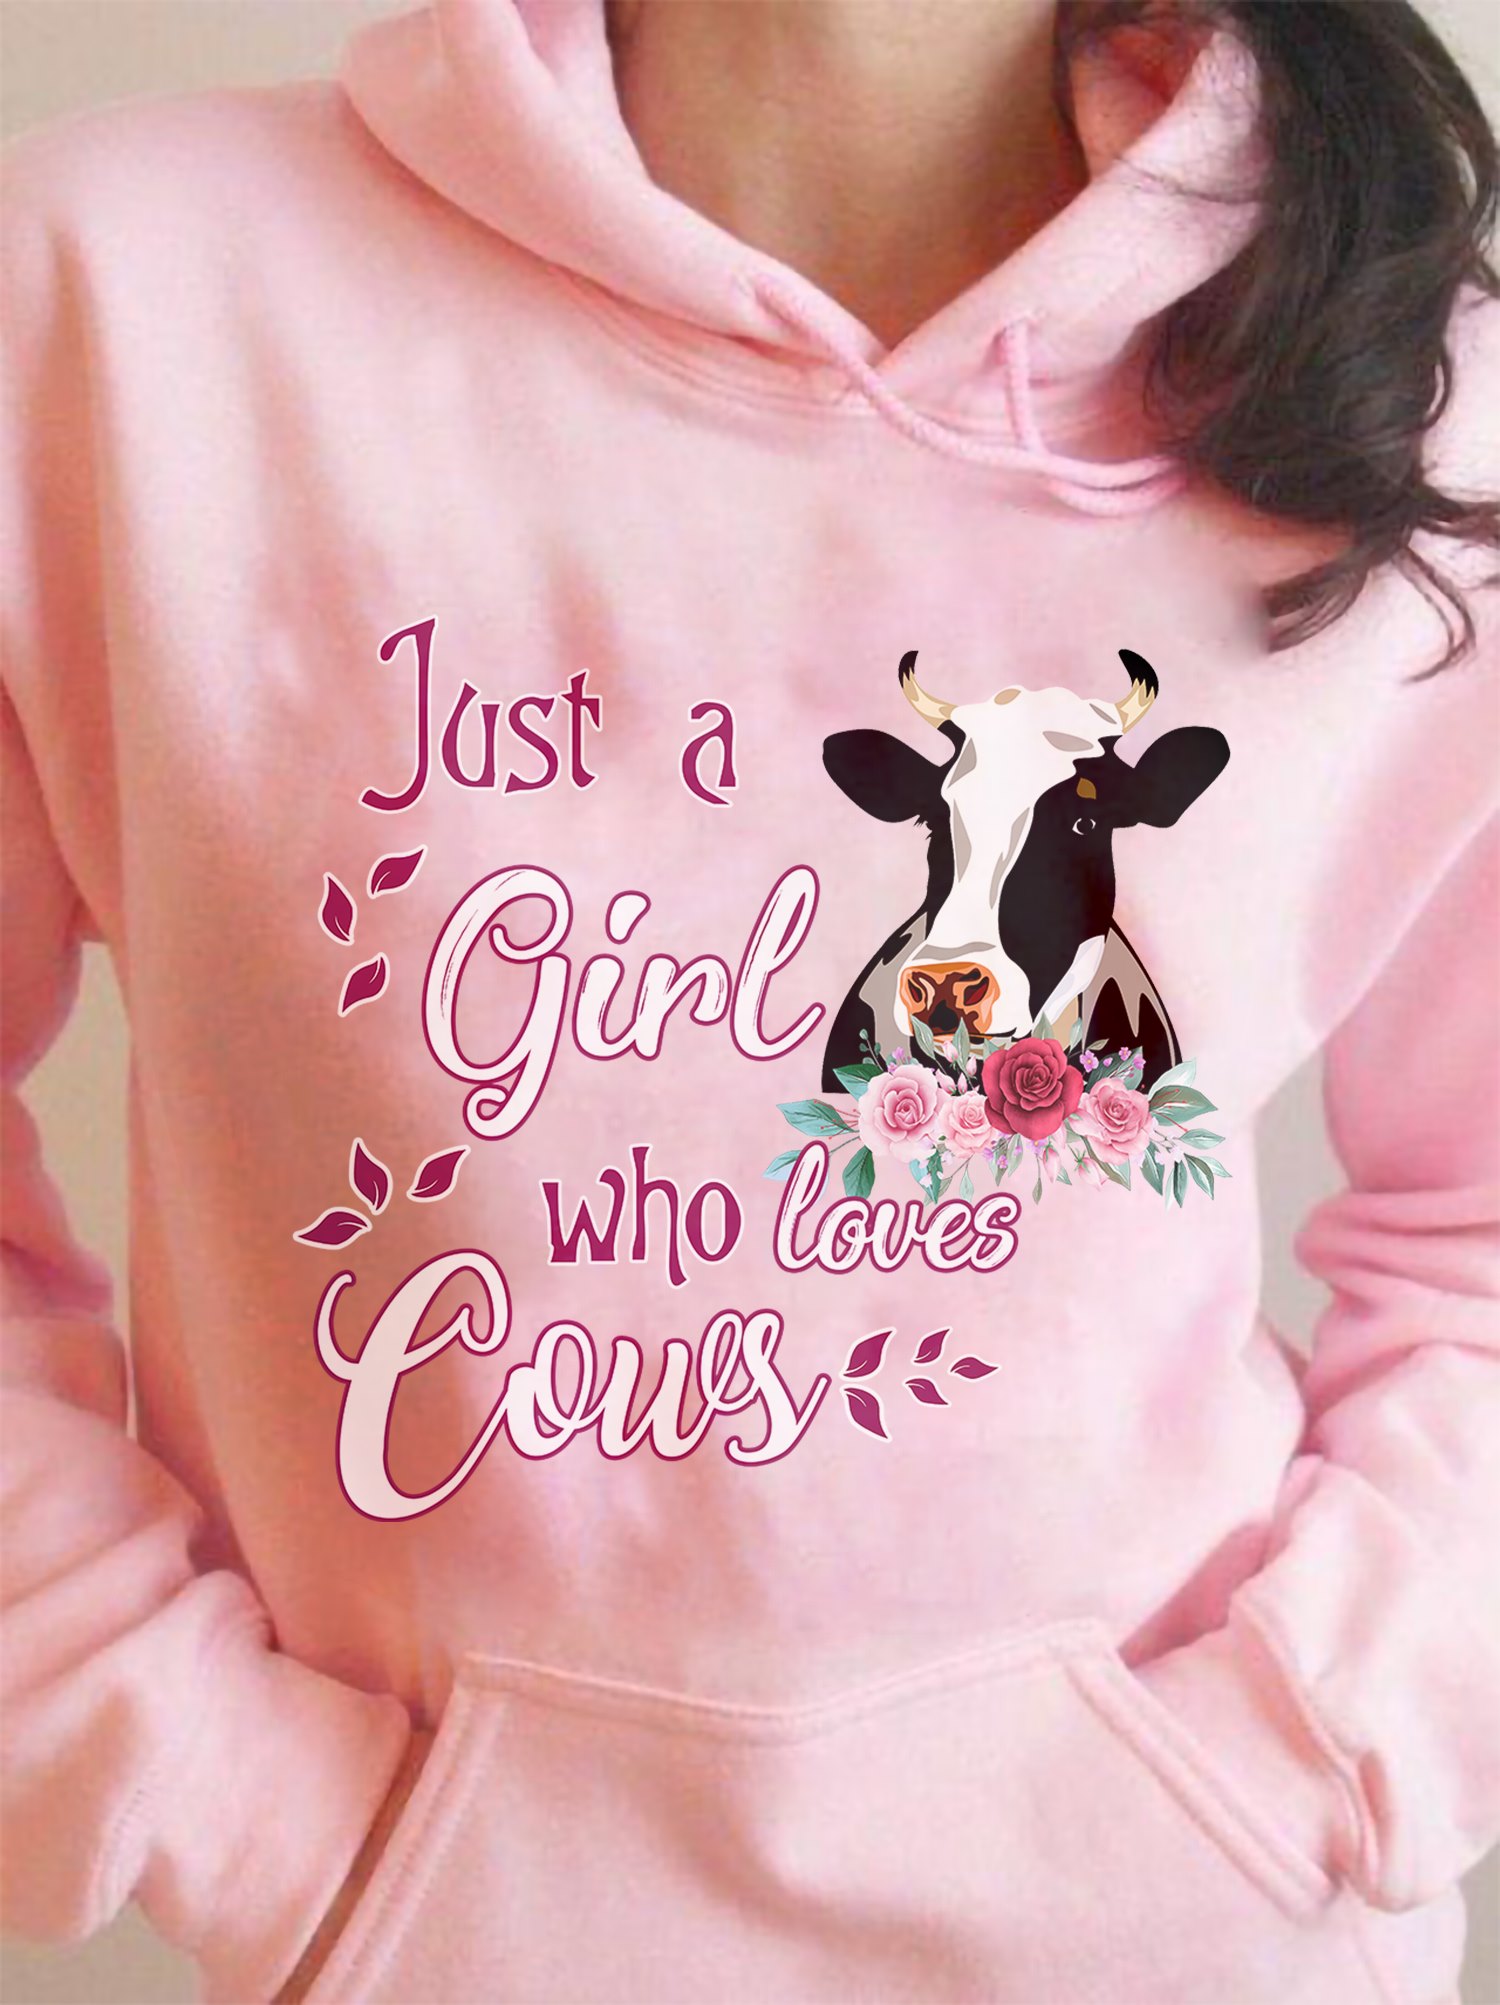 Just a girl who loves cows - Cows lover